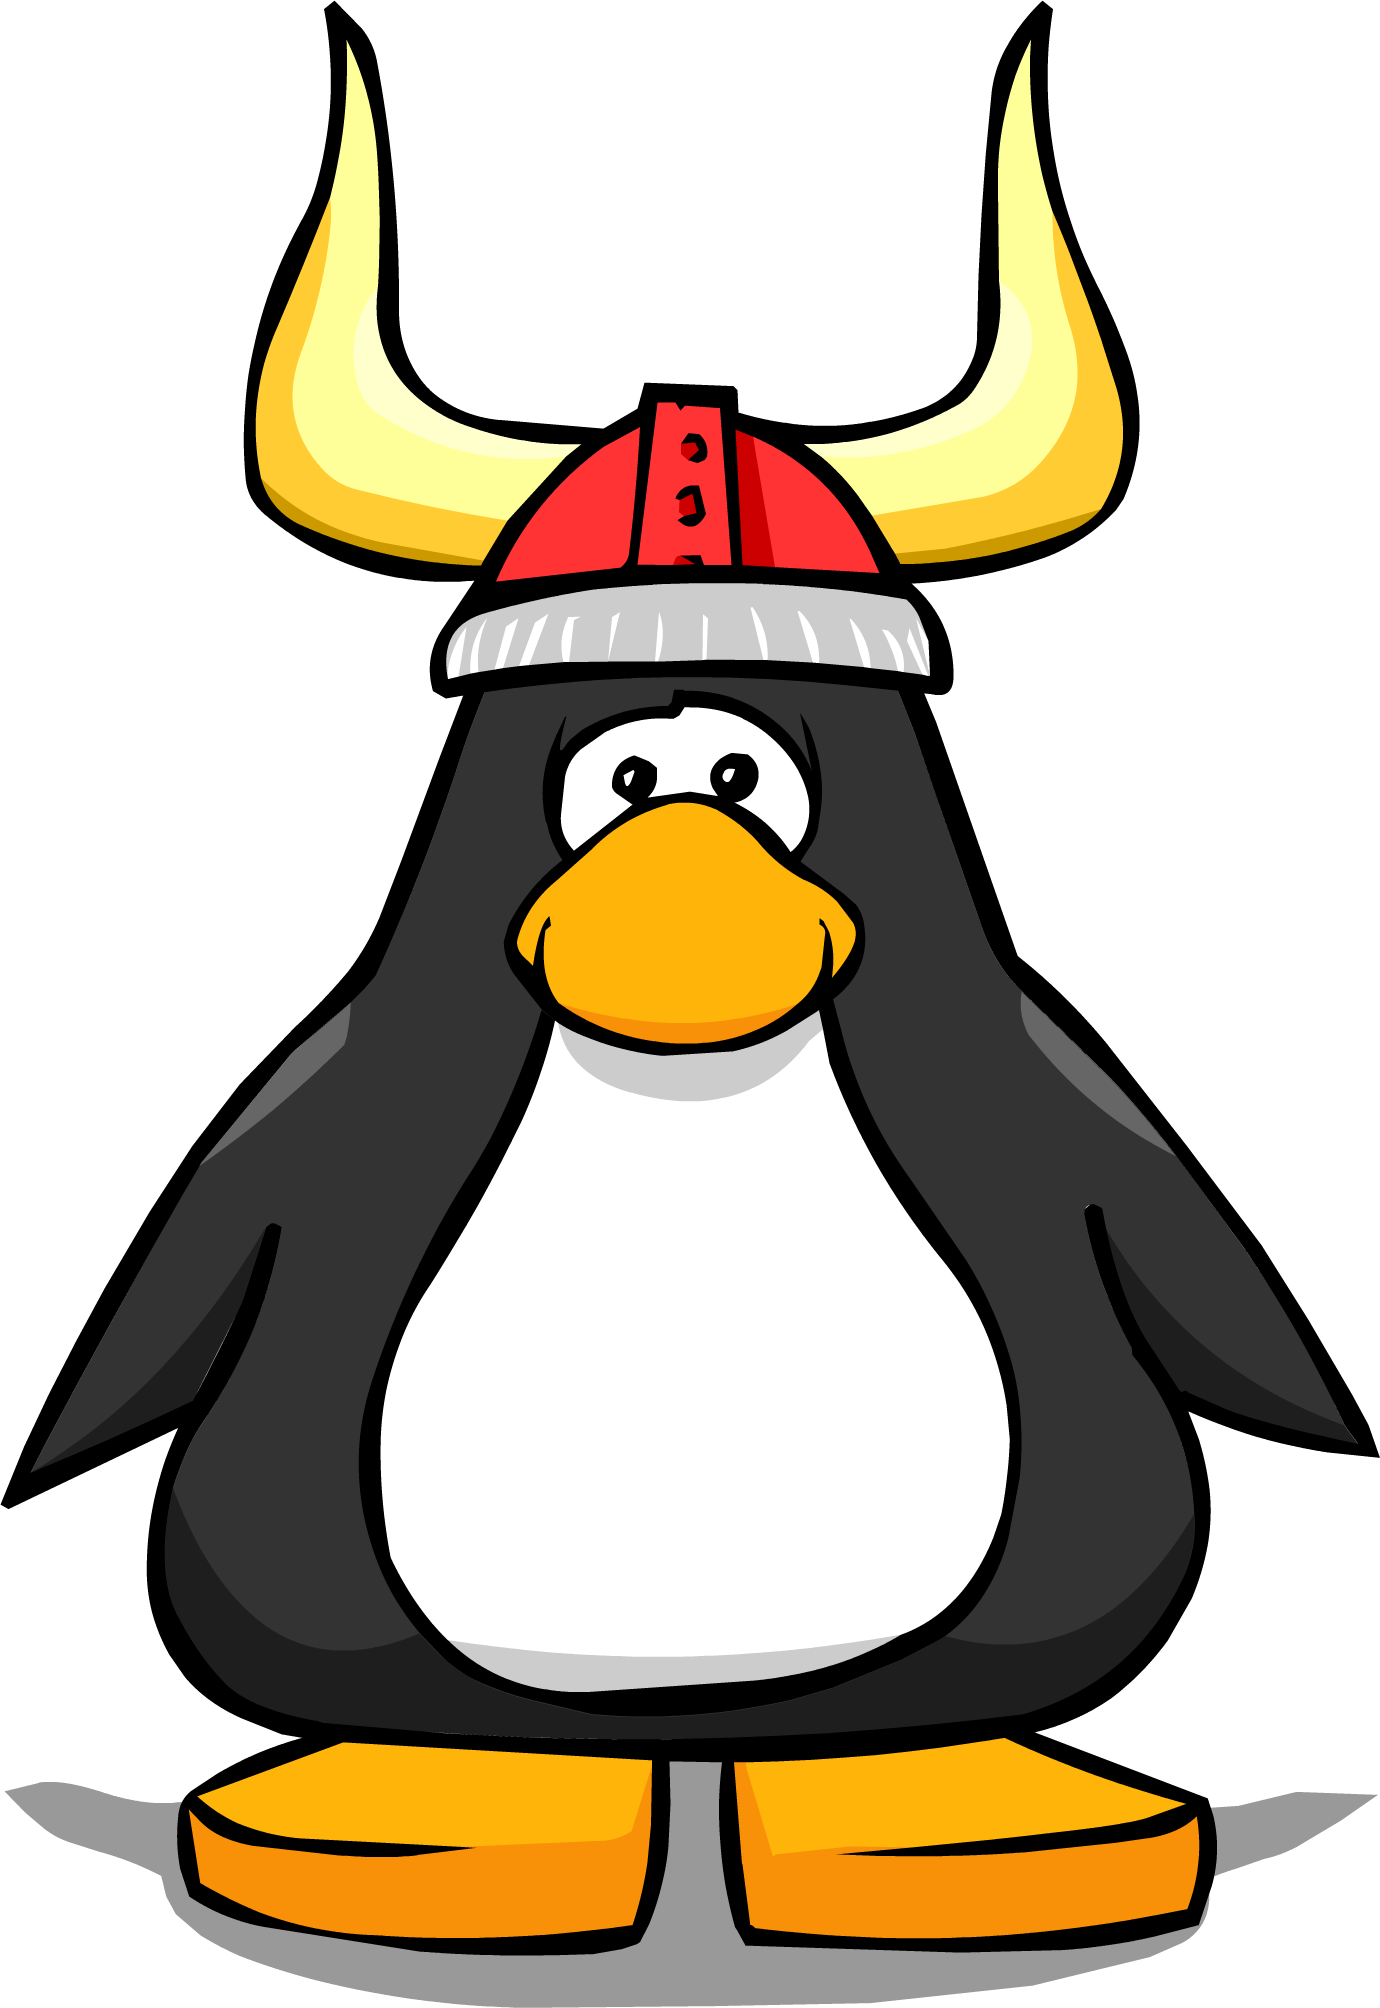 Viking Helmet Pc - Penguin With A Top Hat (1380x2008)